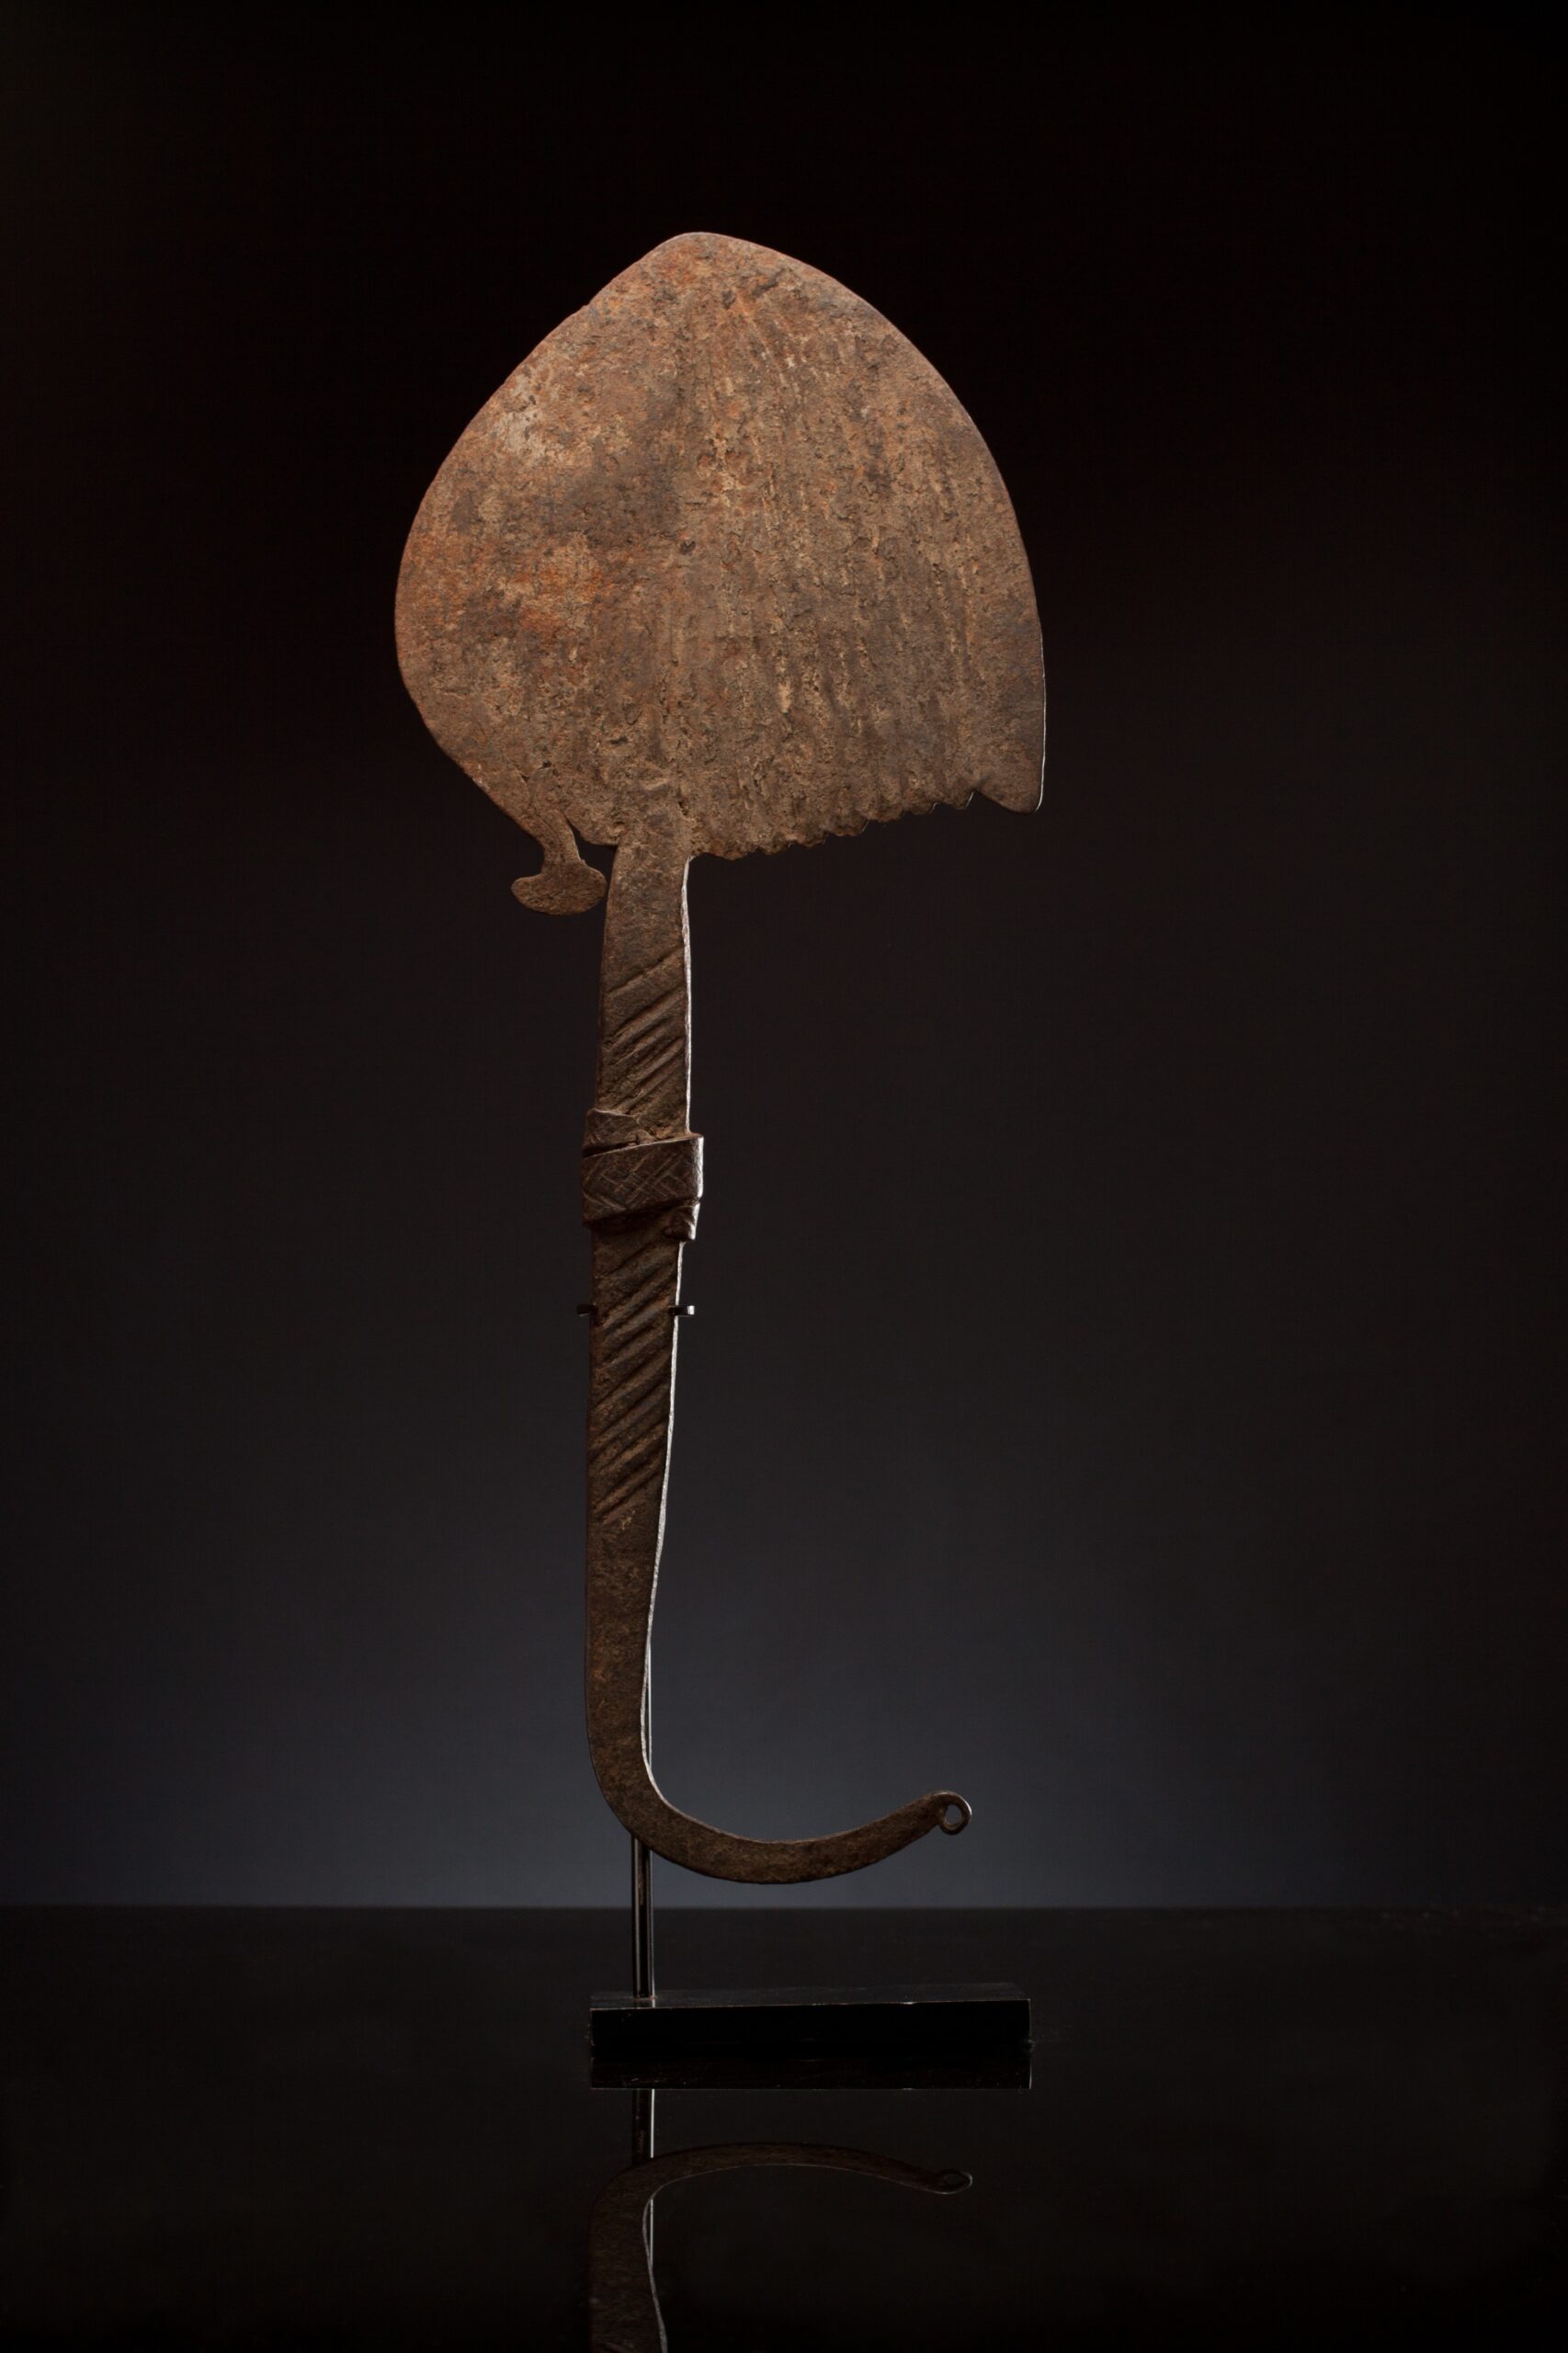 Iron-currency, Nigeria/Cameroon. Original name: Bandaka. According to Ballarini this piece of currency of forged iron resembles a stylized profile of a person: nose, a ponytail tied up in a bun behind the neck, a stylized body which ends in an umbrella handle which is finished off with some ringlets (ANS 2013.17.4, previously of Alan Helms’ collection.)